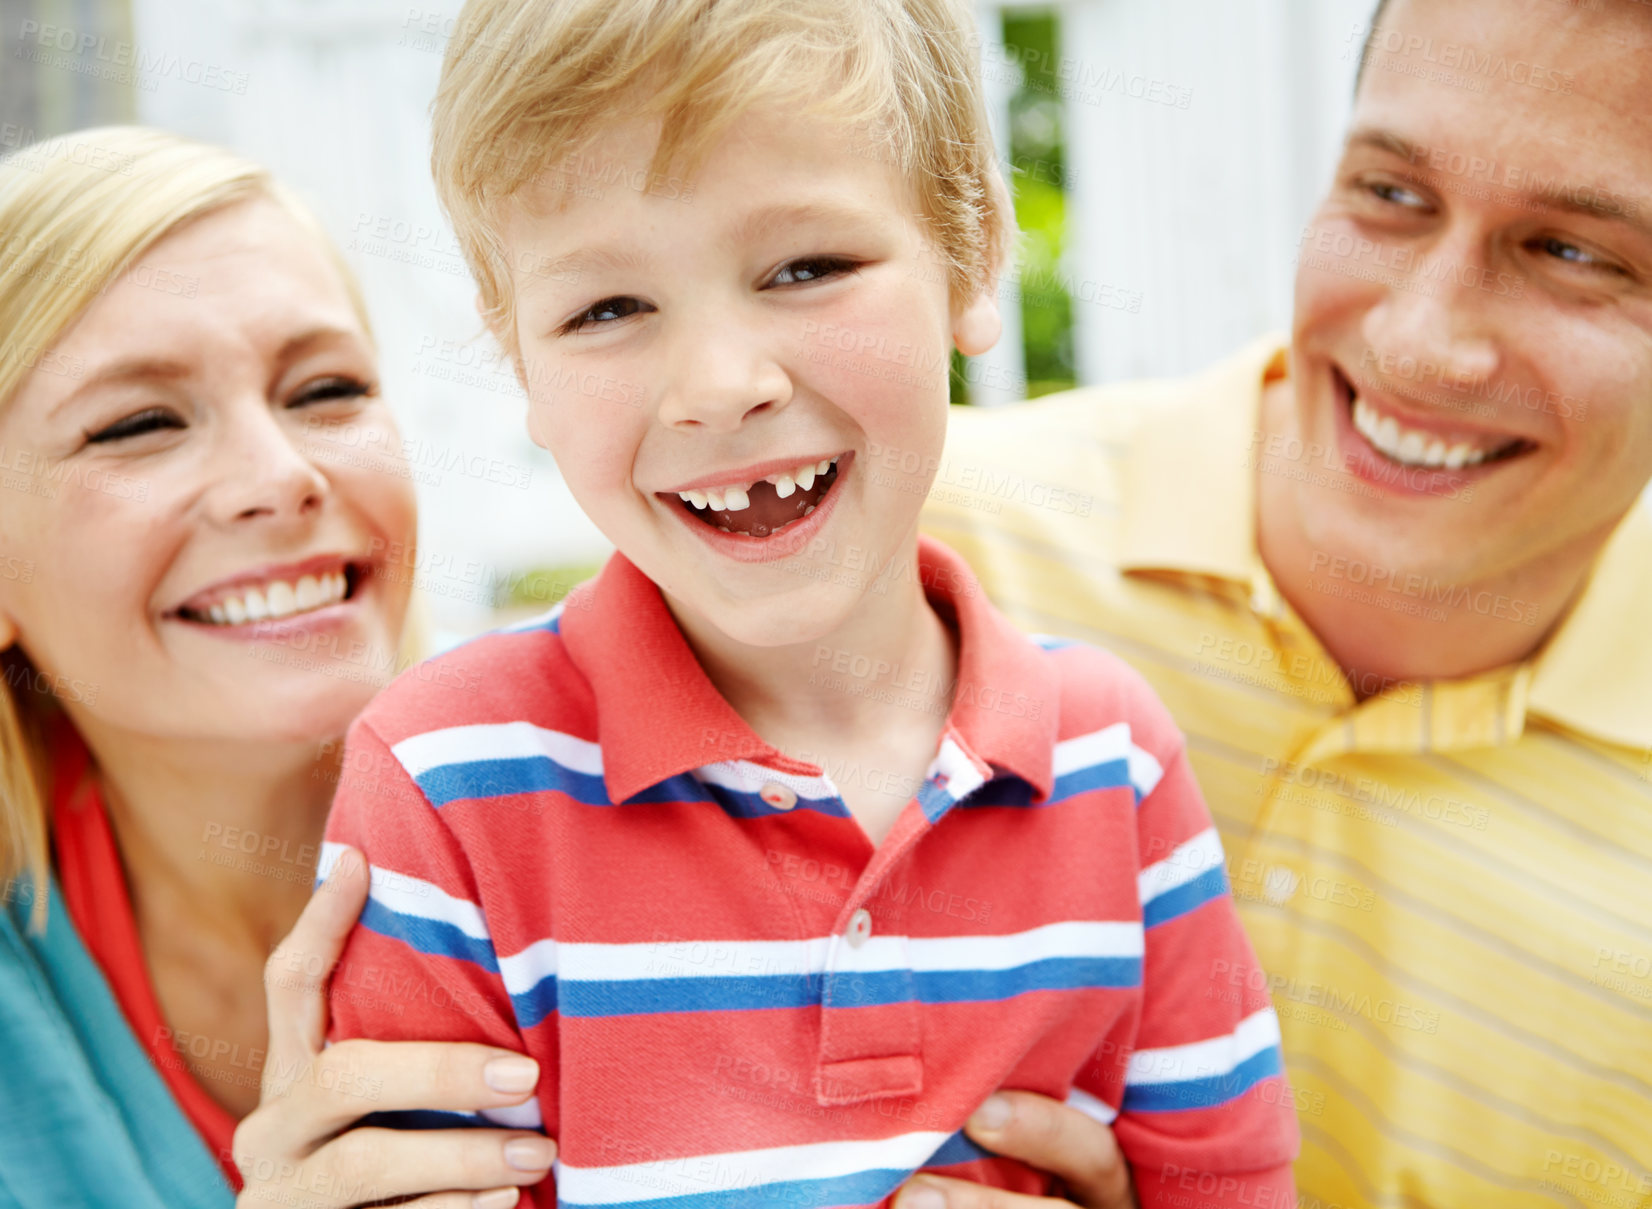 Buy stock photo Happy young family sitting together outdoors